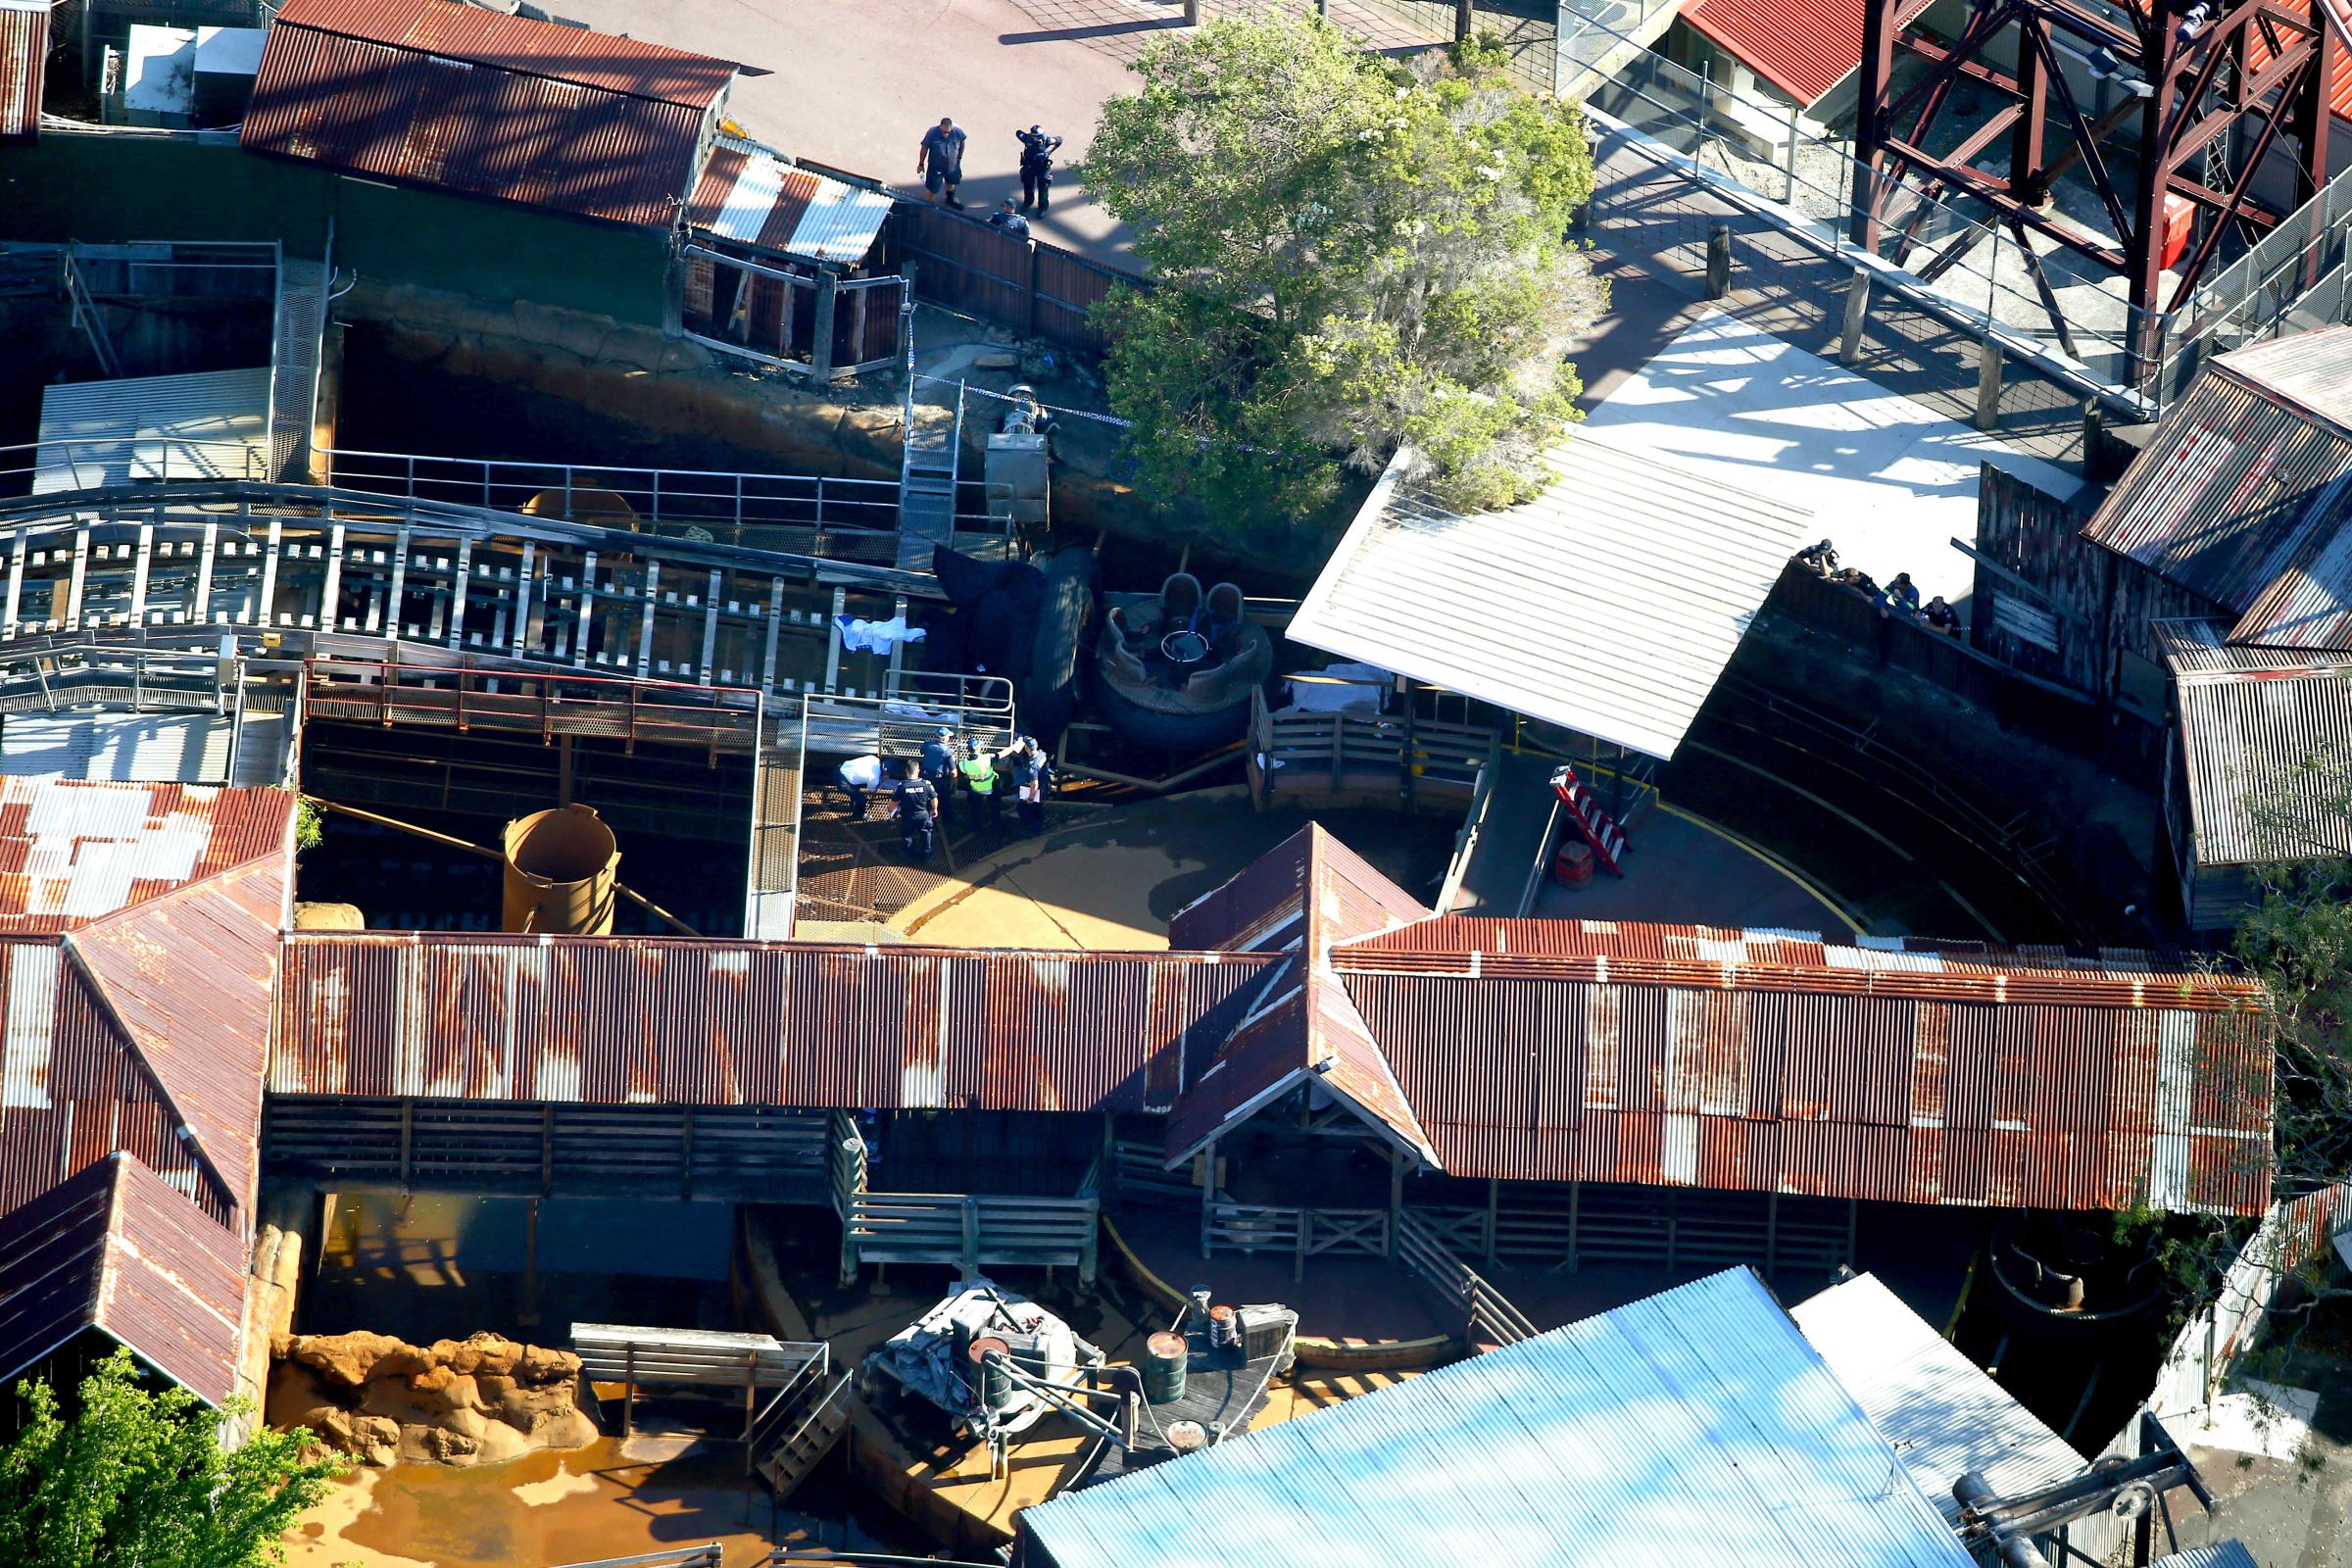 Multiple Fatalities After Ride Accident At Dreamworld